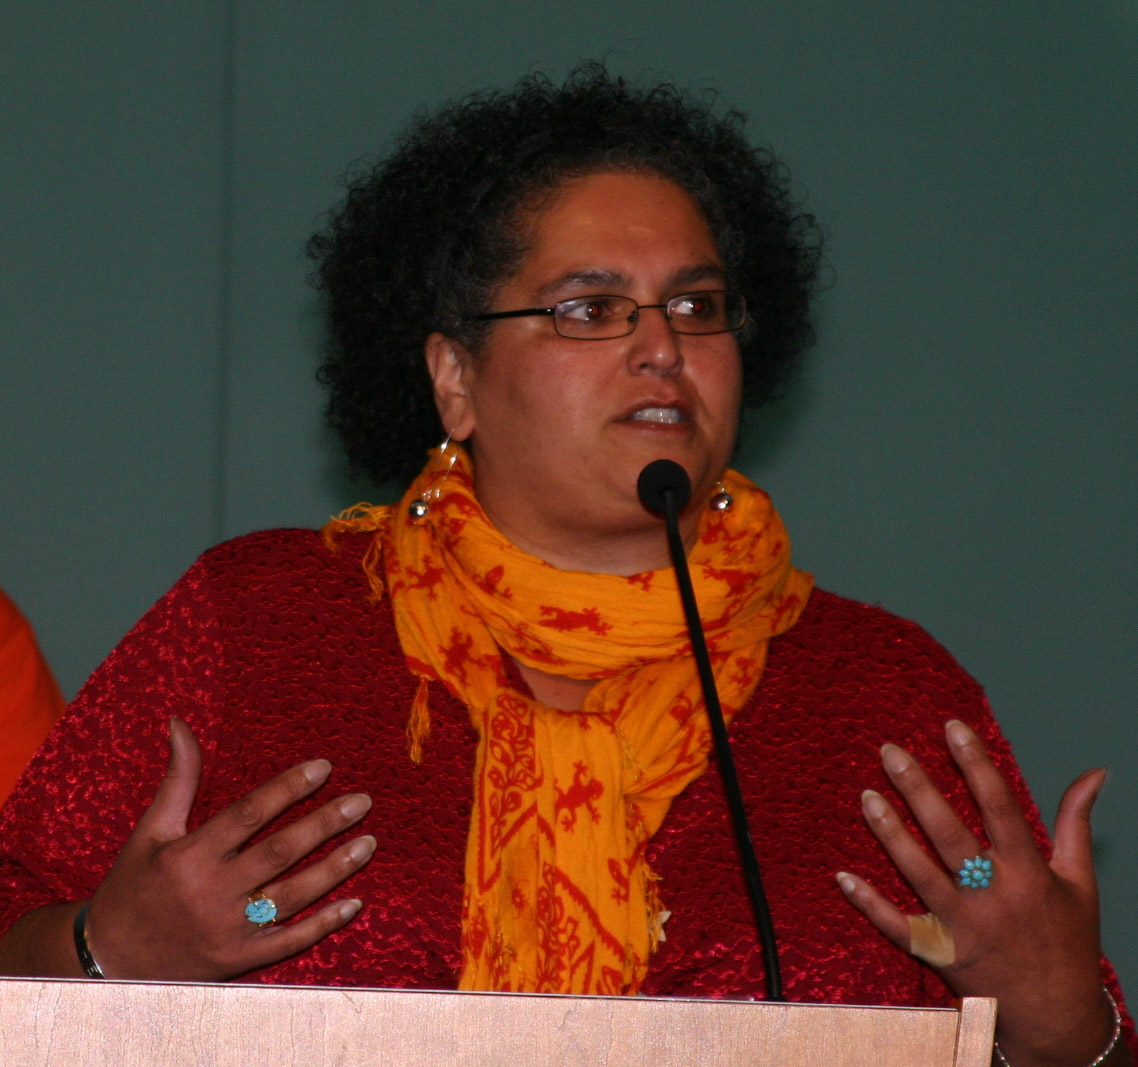 Niaz Dorry at the Food Sovereignty Prize, NYC 2012